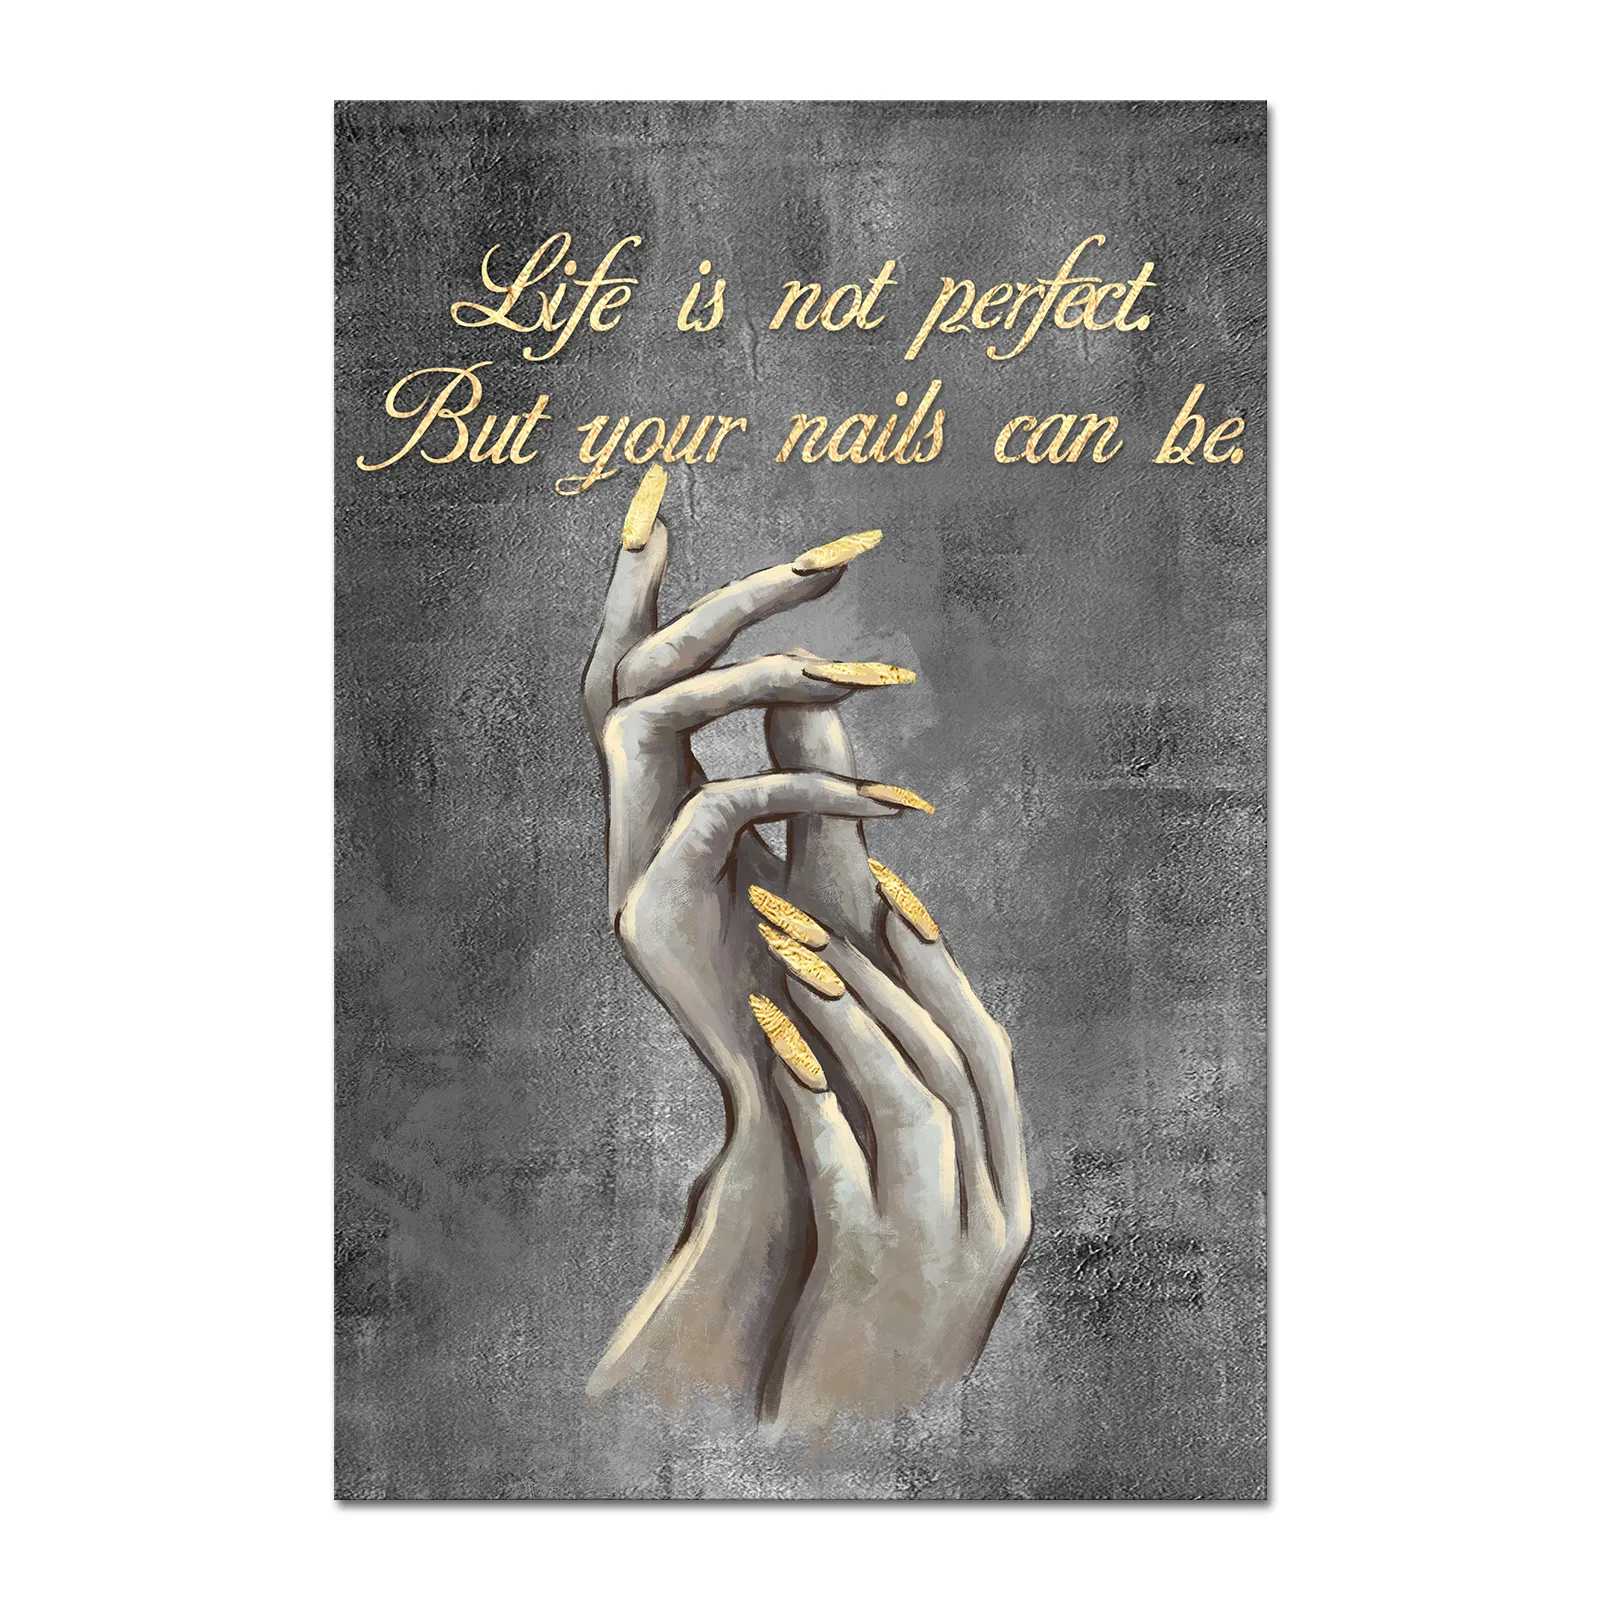 Fashion Grey And Golden Hand Nails Painted Motivational Painting Poster Printed Print Nails Salon Wall Decoration Item